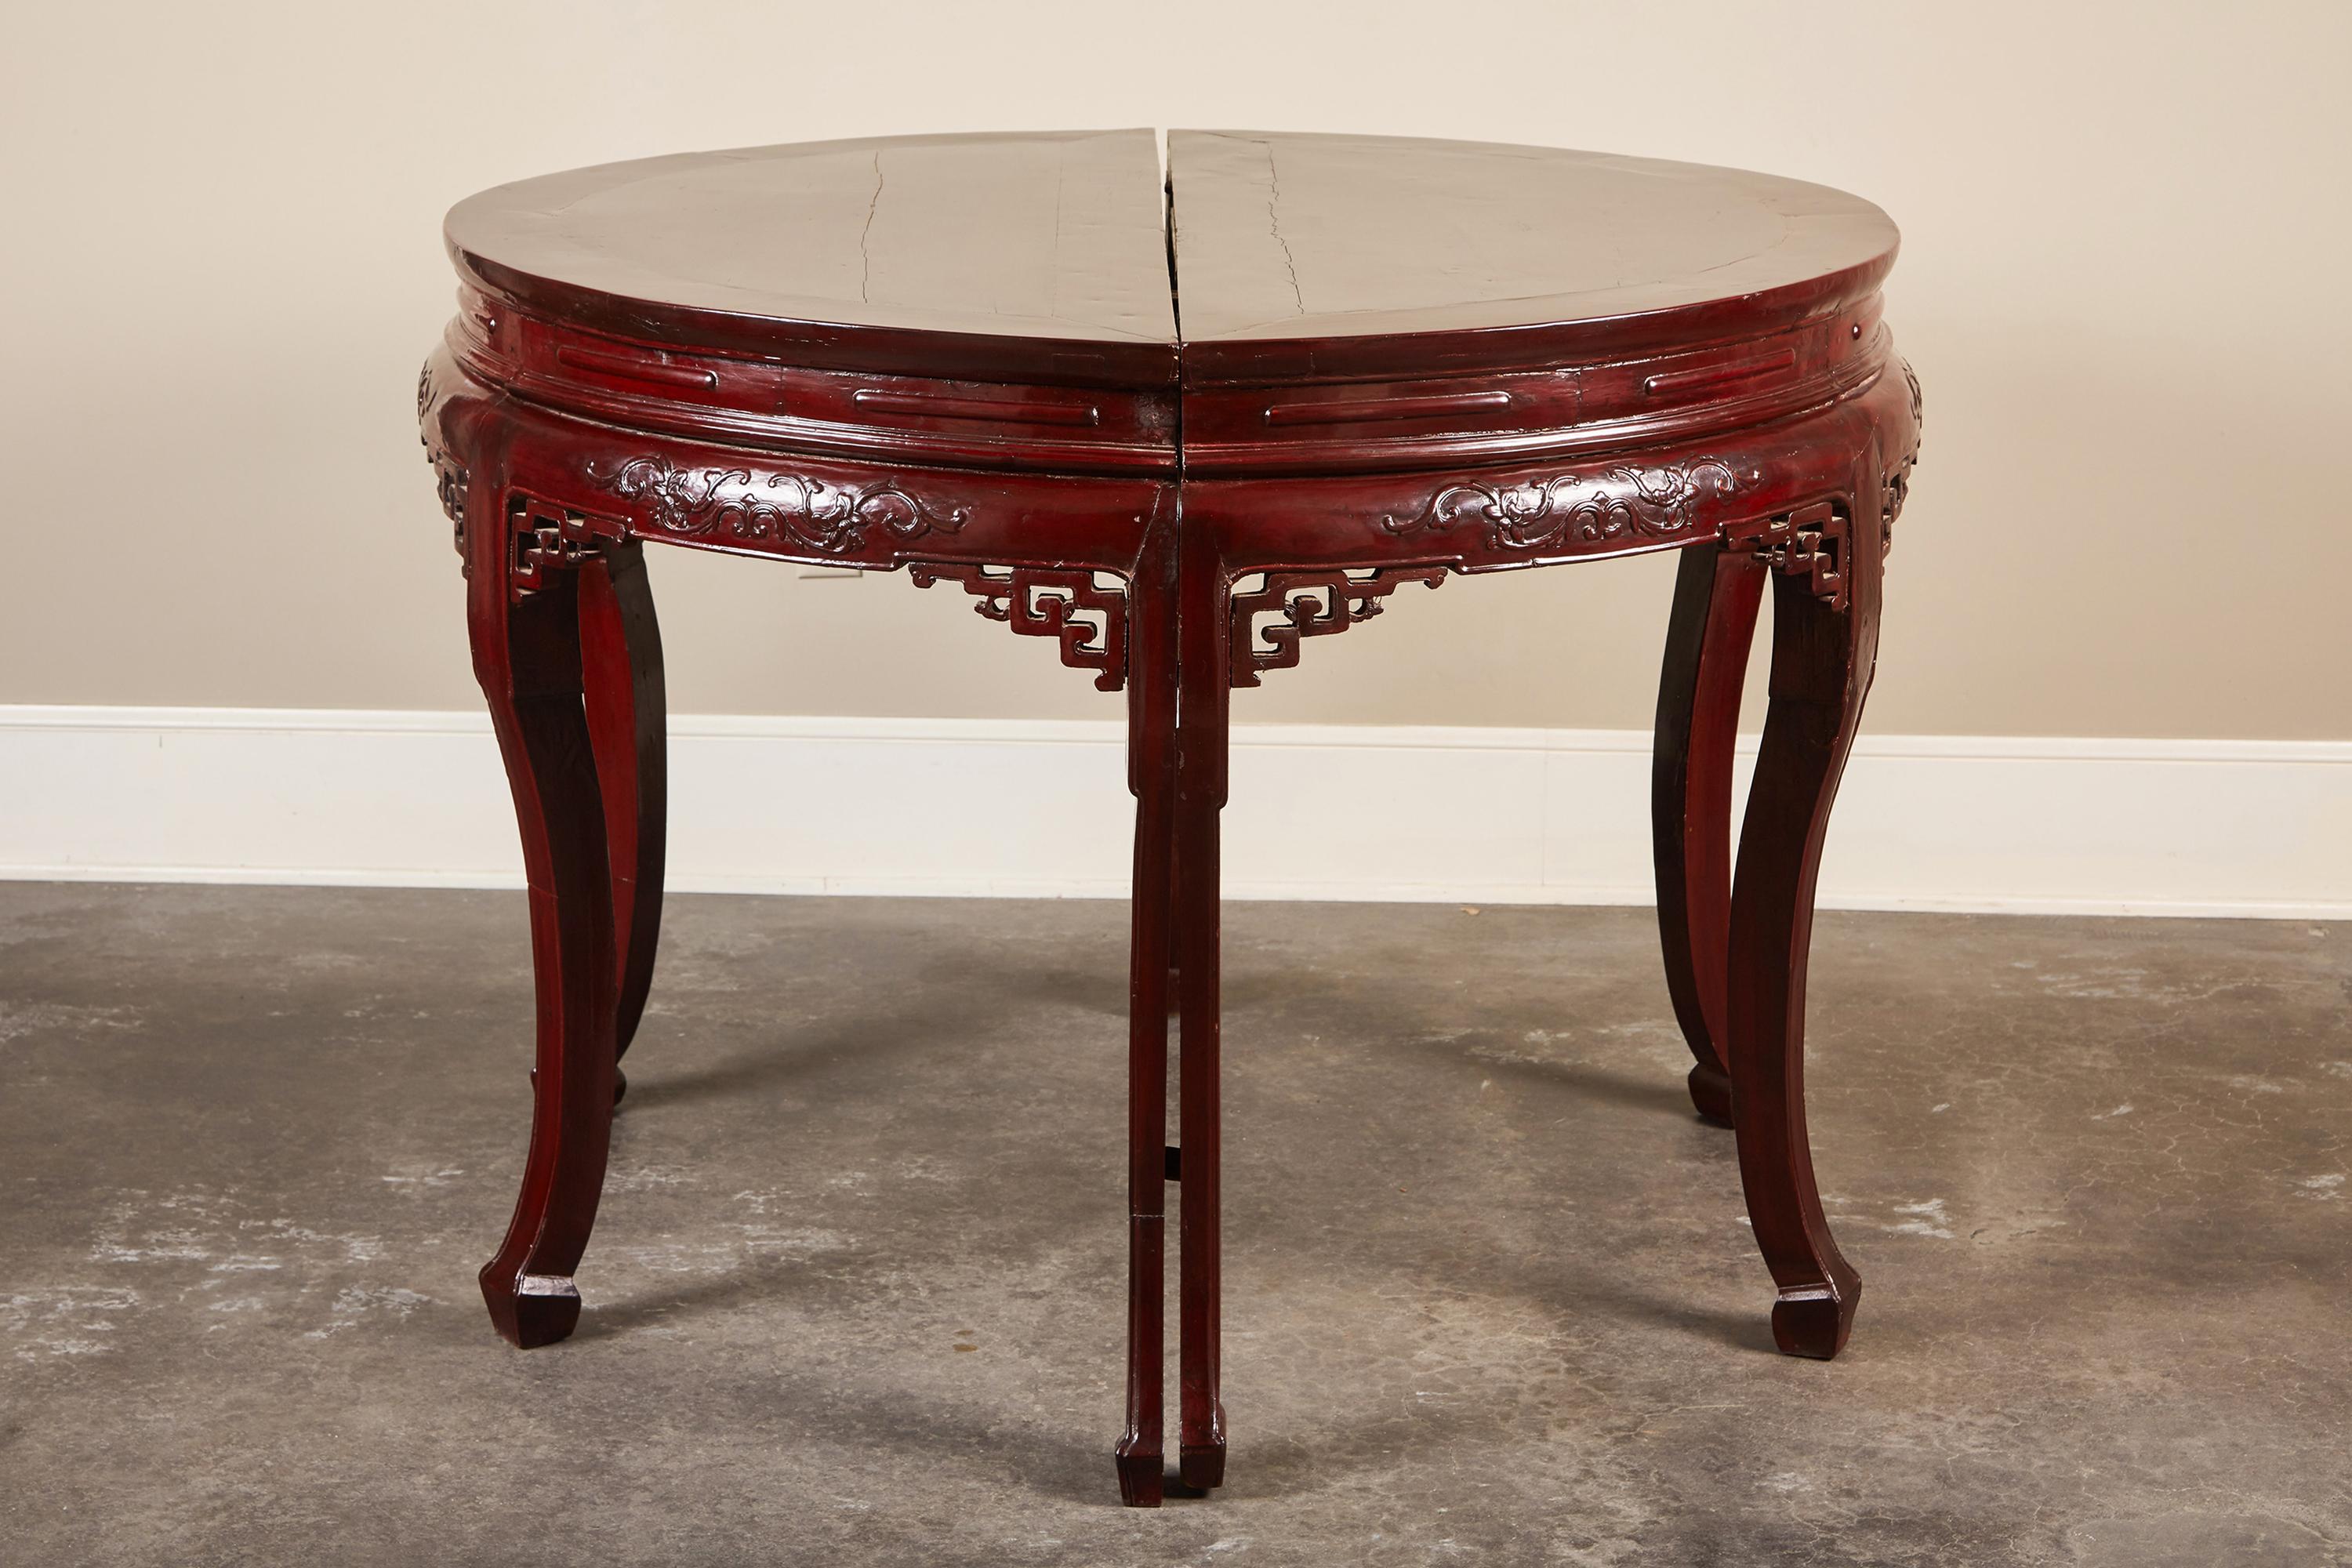 Pair of Chinese Qing Dynasty demilune tables made in the 19th century. Covered in deep maroon lacquer and featuring delicate relief-carved scrolls along the apron, intricate pierced spandrels and molded S-form legs with hoof feet, these versatile